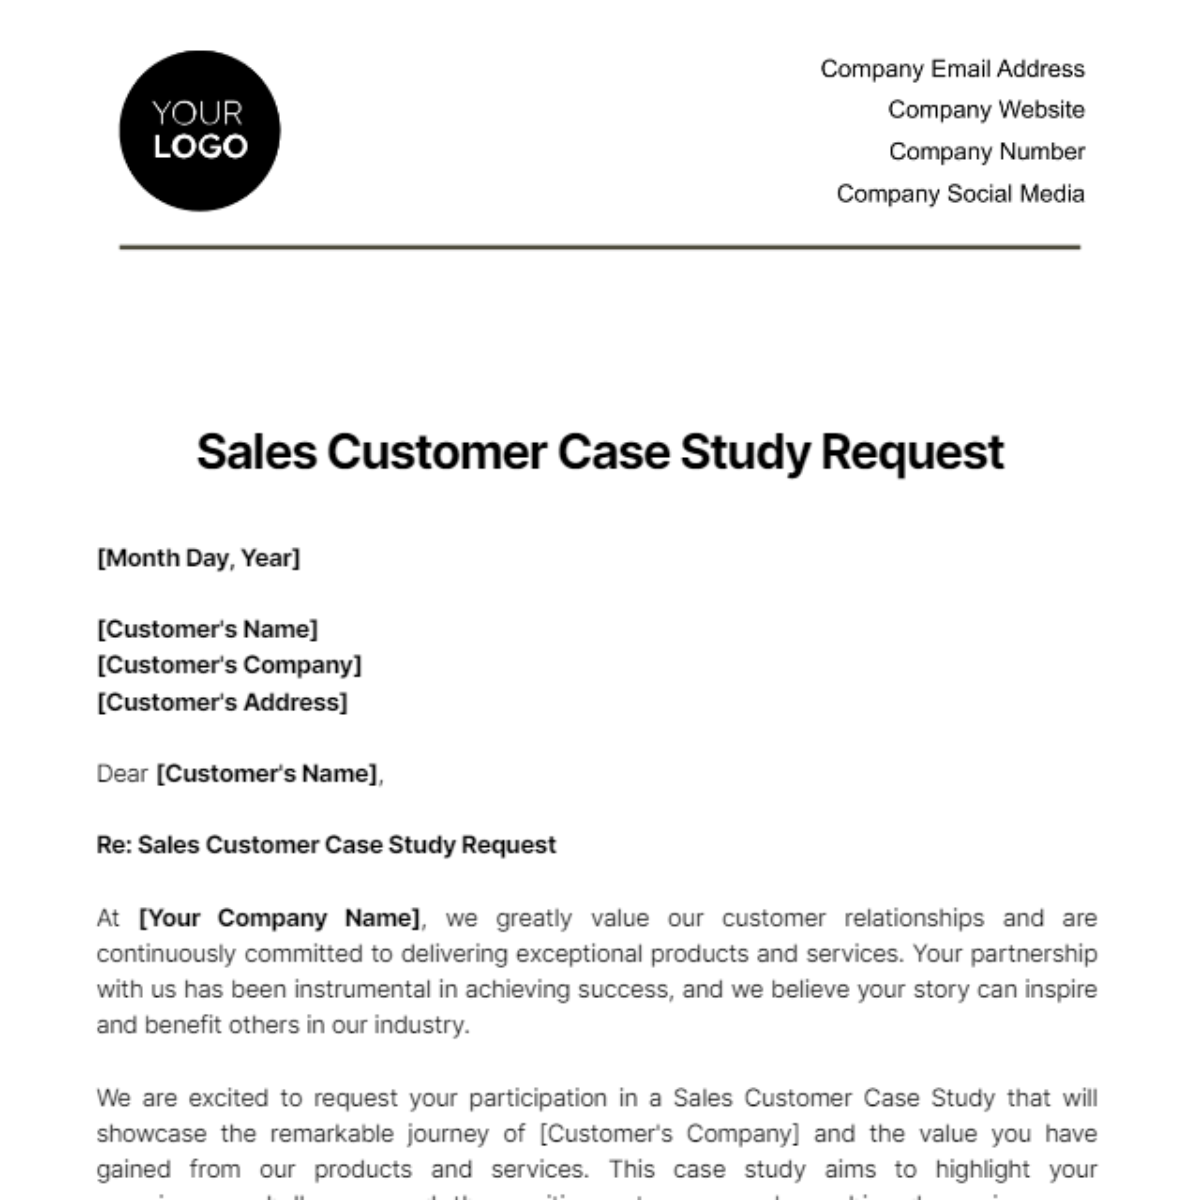 Sales Customer Case Study Request Template